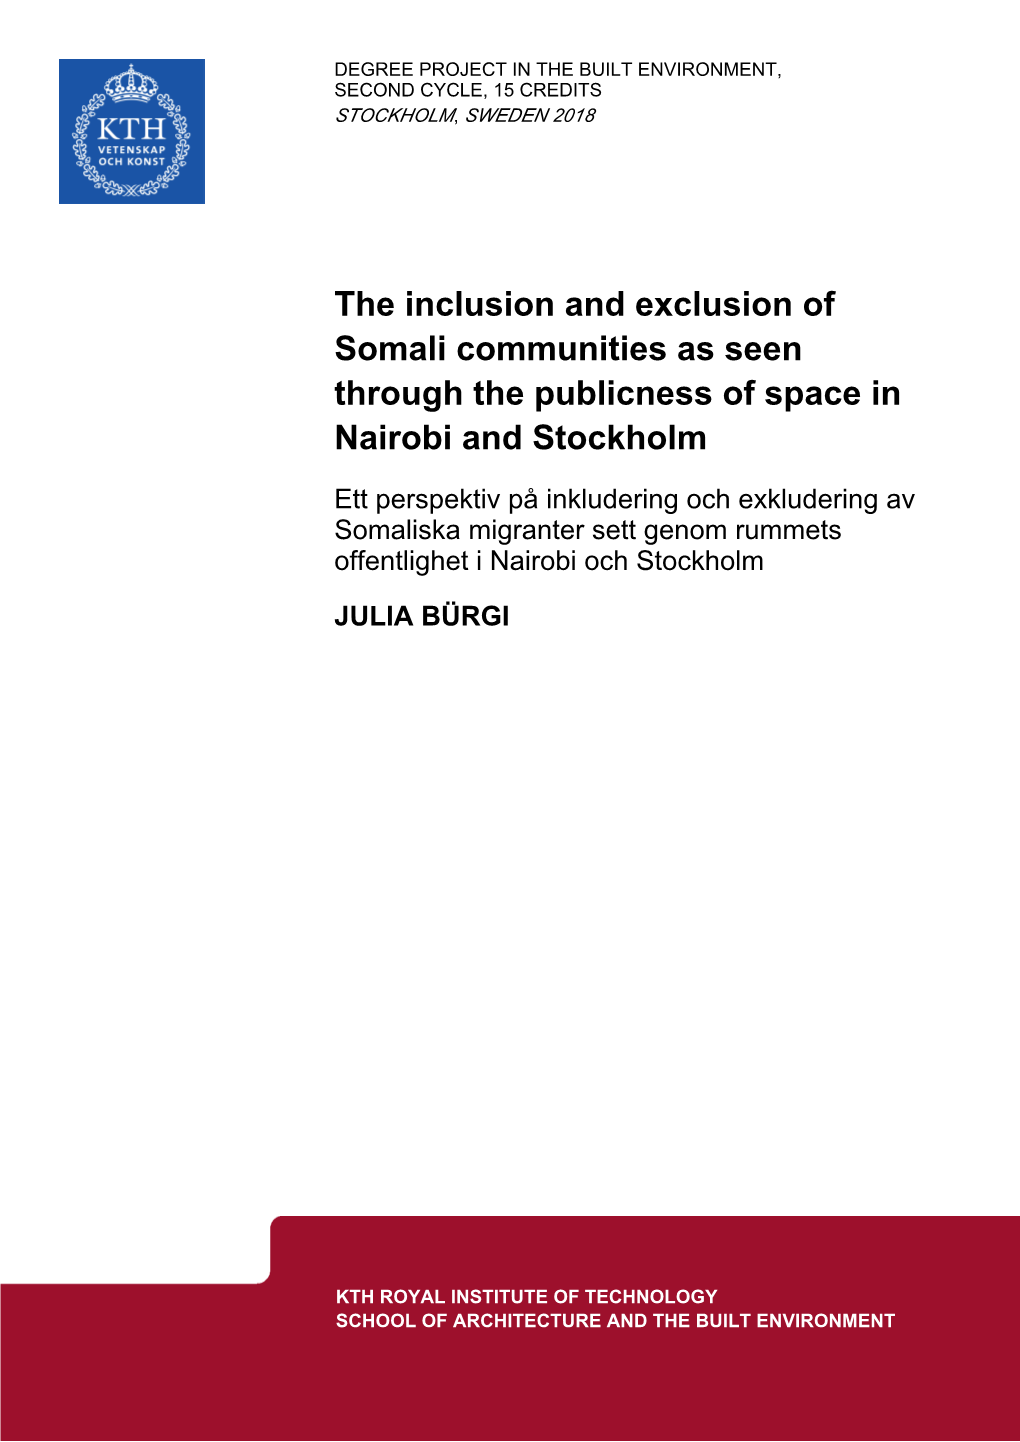 The Inclusion and Exclusion of Somali Communities As Seen Through the Publicness of Space in Nairobi and Stockholm